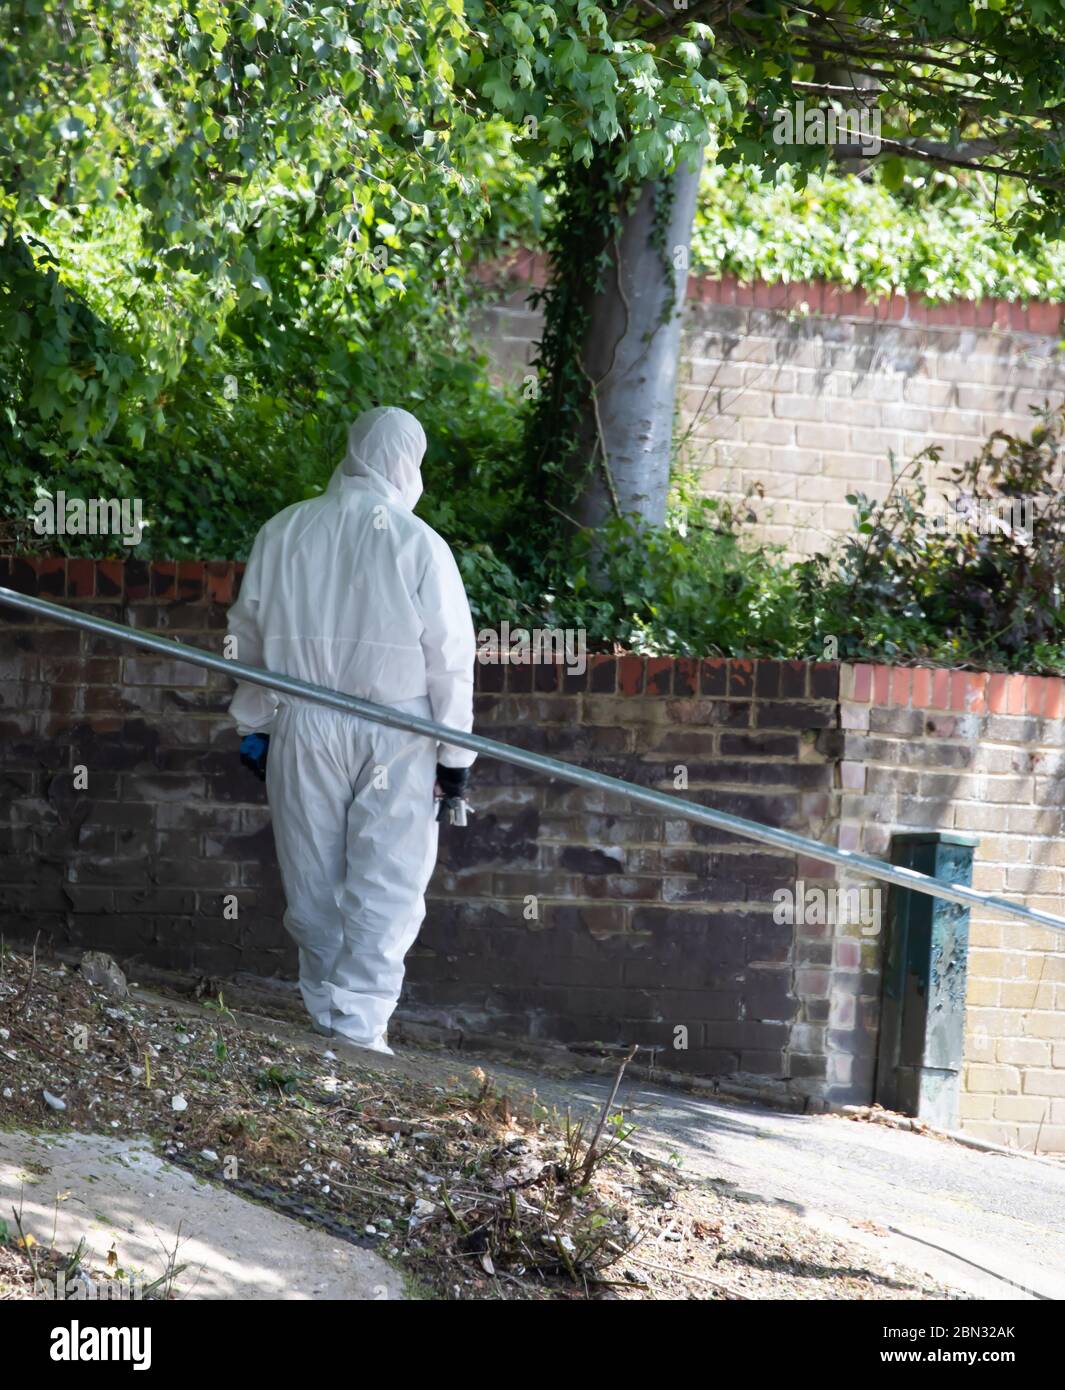 Biggin Hill, Kent, UK. 12th May, 2020. A man in white Personal Protective Equipment from Clarion, waits outside a property in Biggin Hill, Kent before entering because of Covid-19. Credit: Keith Larby/Alamy Live News Stock Photo